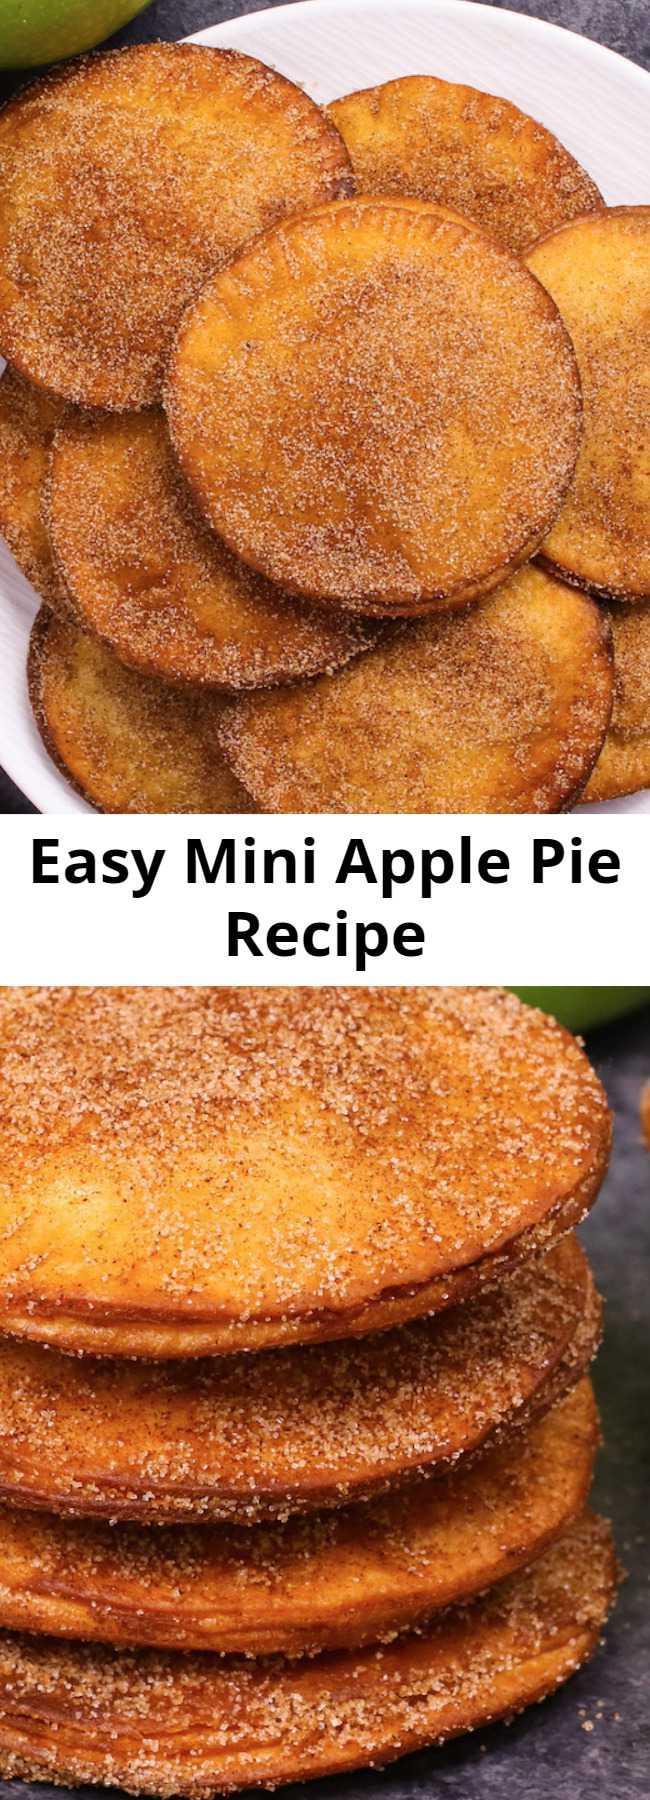 Easy Mini Apple Pie Recipe - Mini Apple Pies have sweet and soft filing with crispy pie on the outside. It’s simple to make and takes less than 20 minutes. It’s one of my favorite dessert recipes.